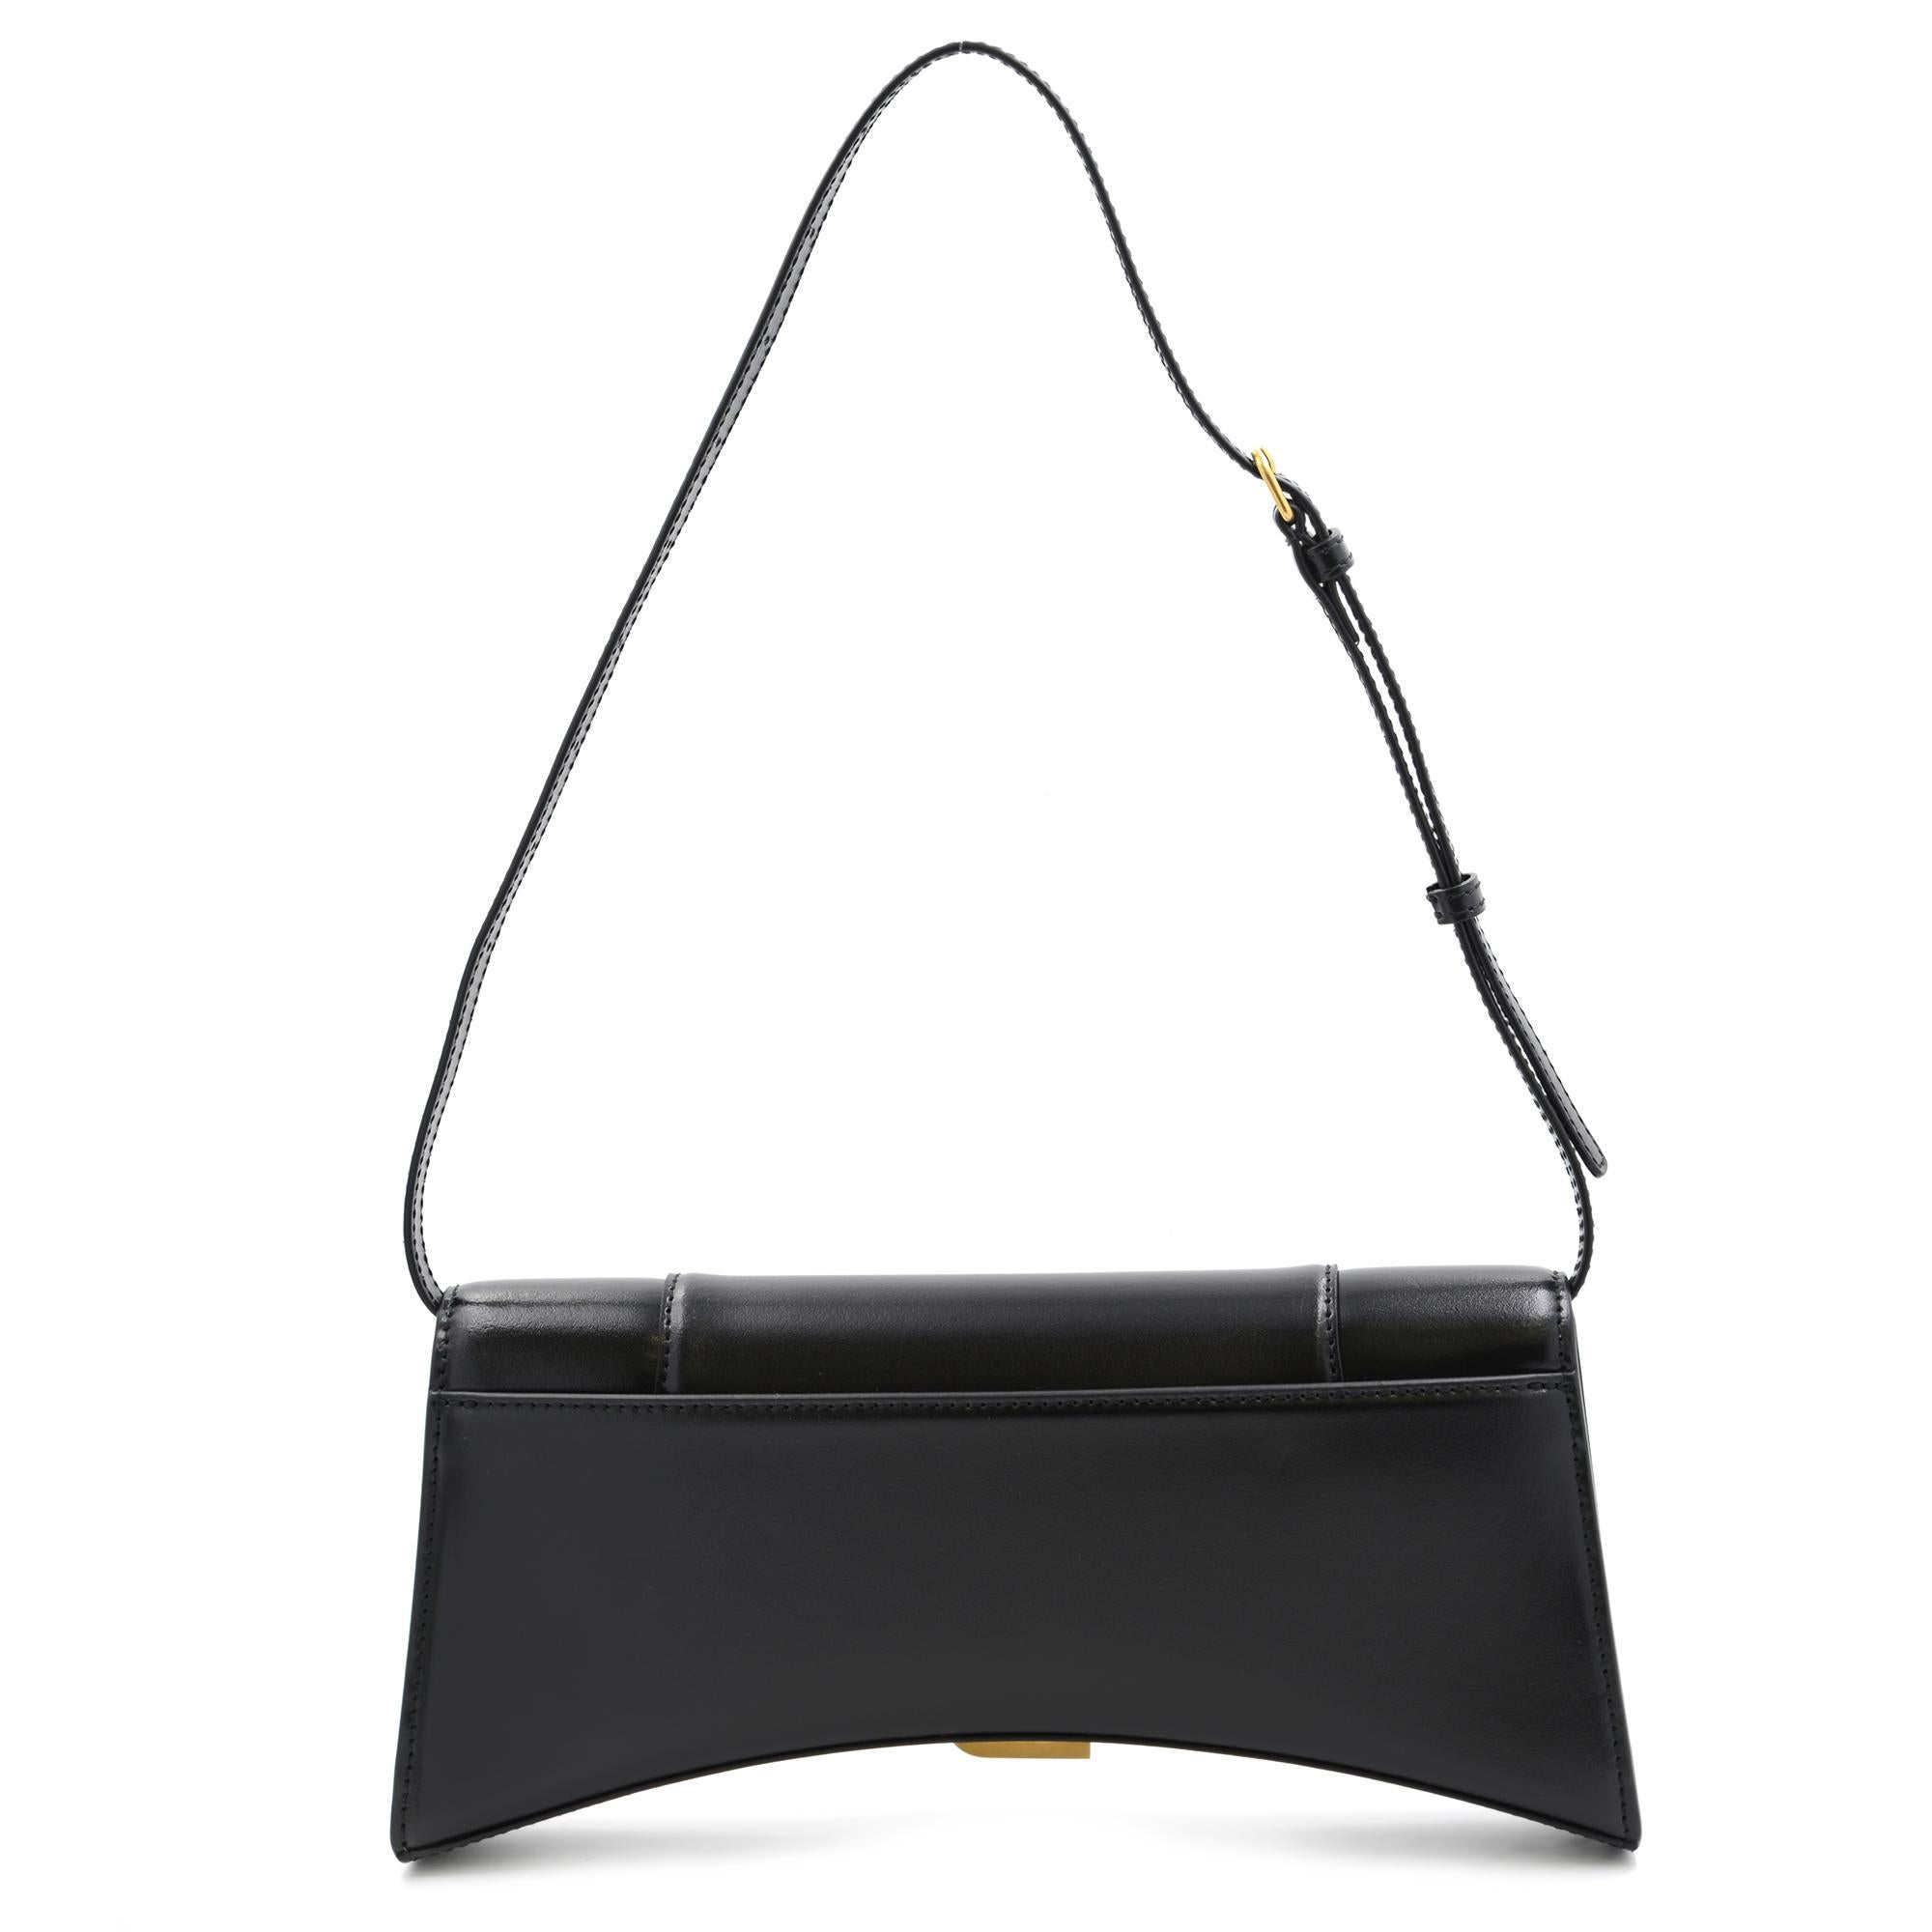 Balenciaga arch Hourglass stretched shoulder bag comes in black leather with a golden-toned metal monogram clasp and a single interior card slot. Black calf leather. Antique gold tone hardware. Snap/Magnetic Closure. Measurements: L 11 inches x W